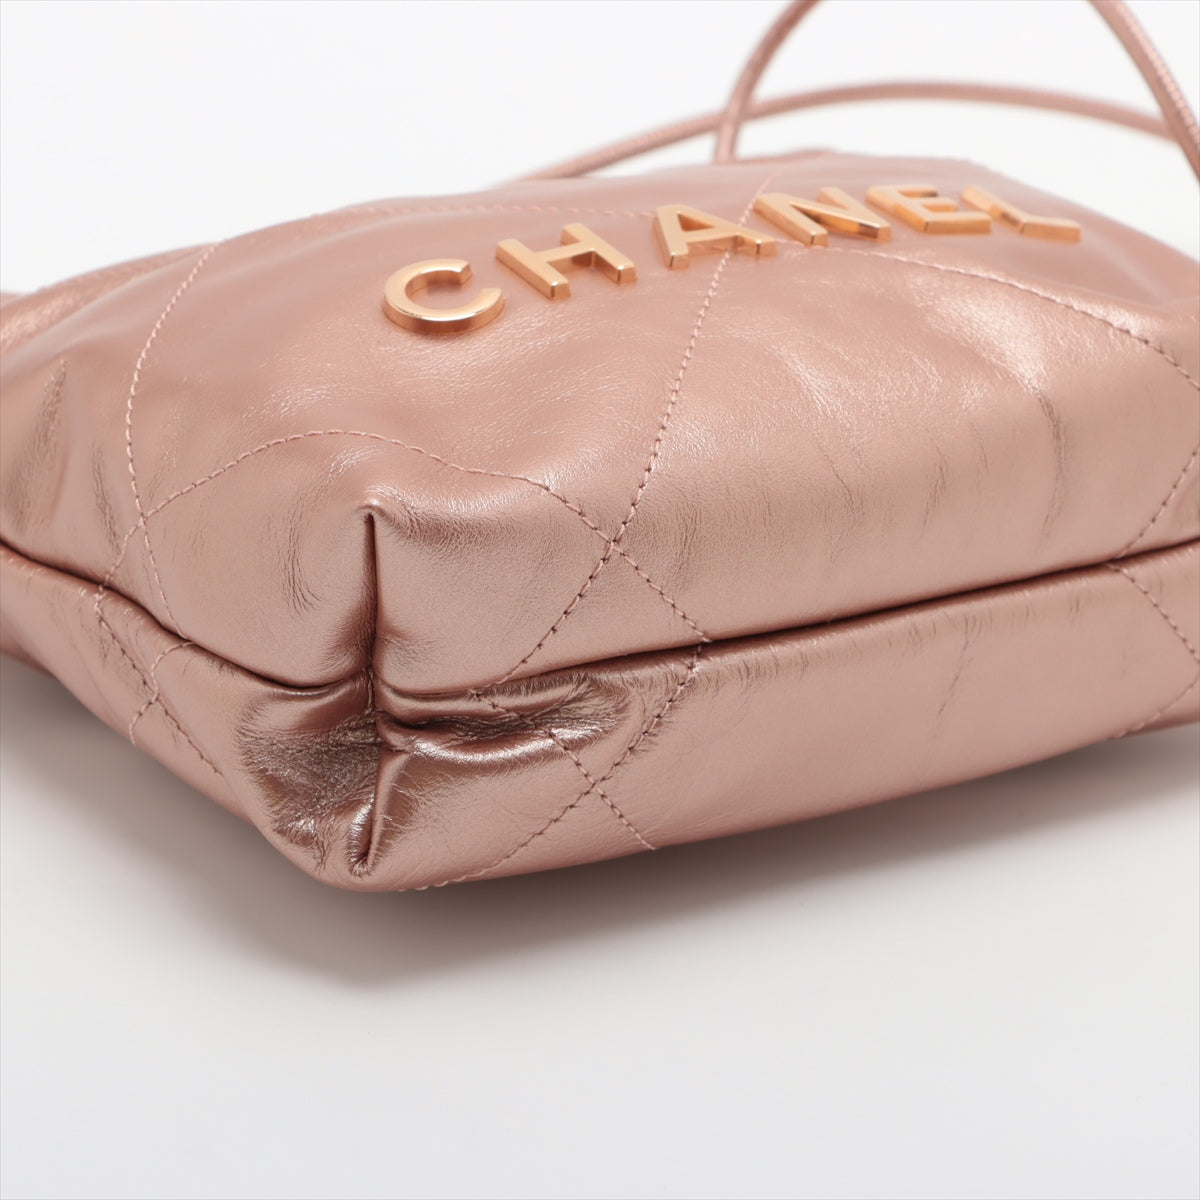 Chanel Chanel 22 mini Leather Chain Shoulder Bag Pink Gold Gold Metal Fittings